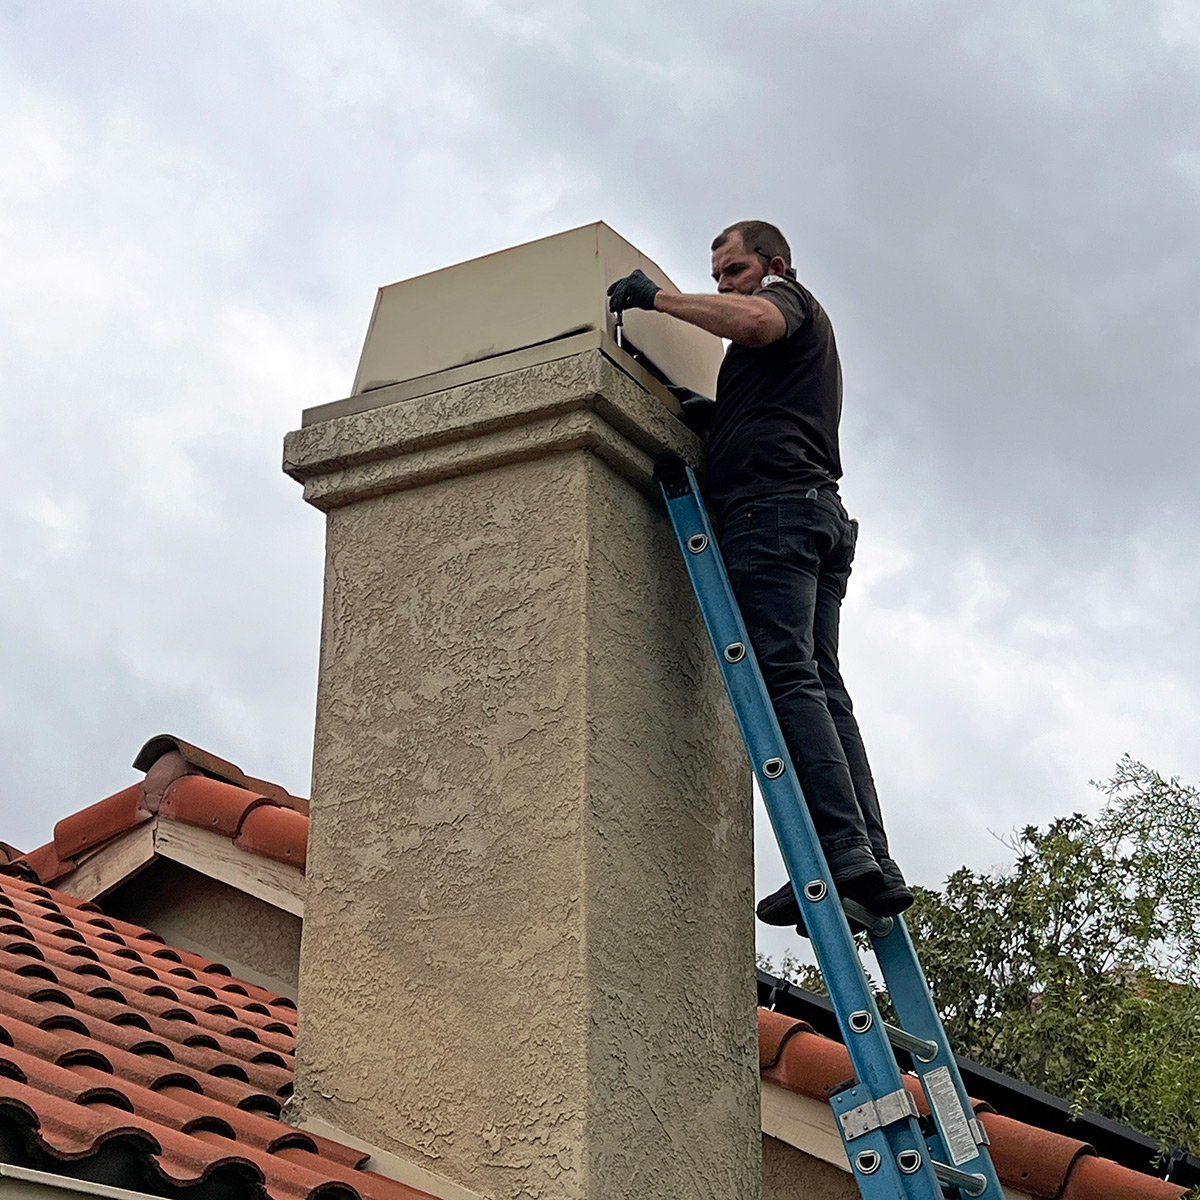 Professional 3 level chimney inspections available in Lakeside CA